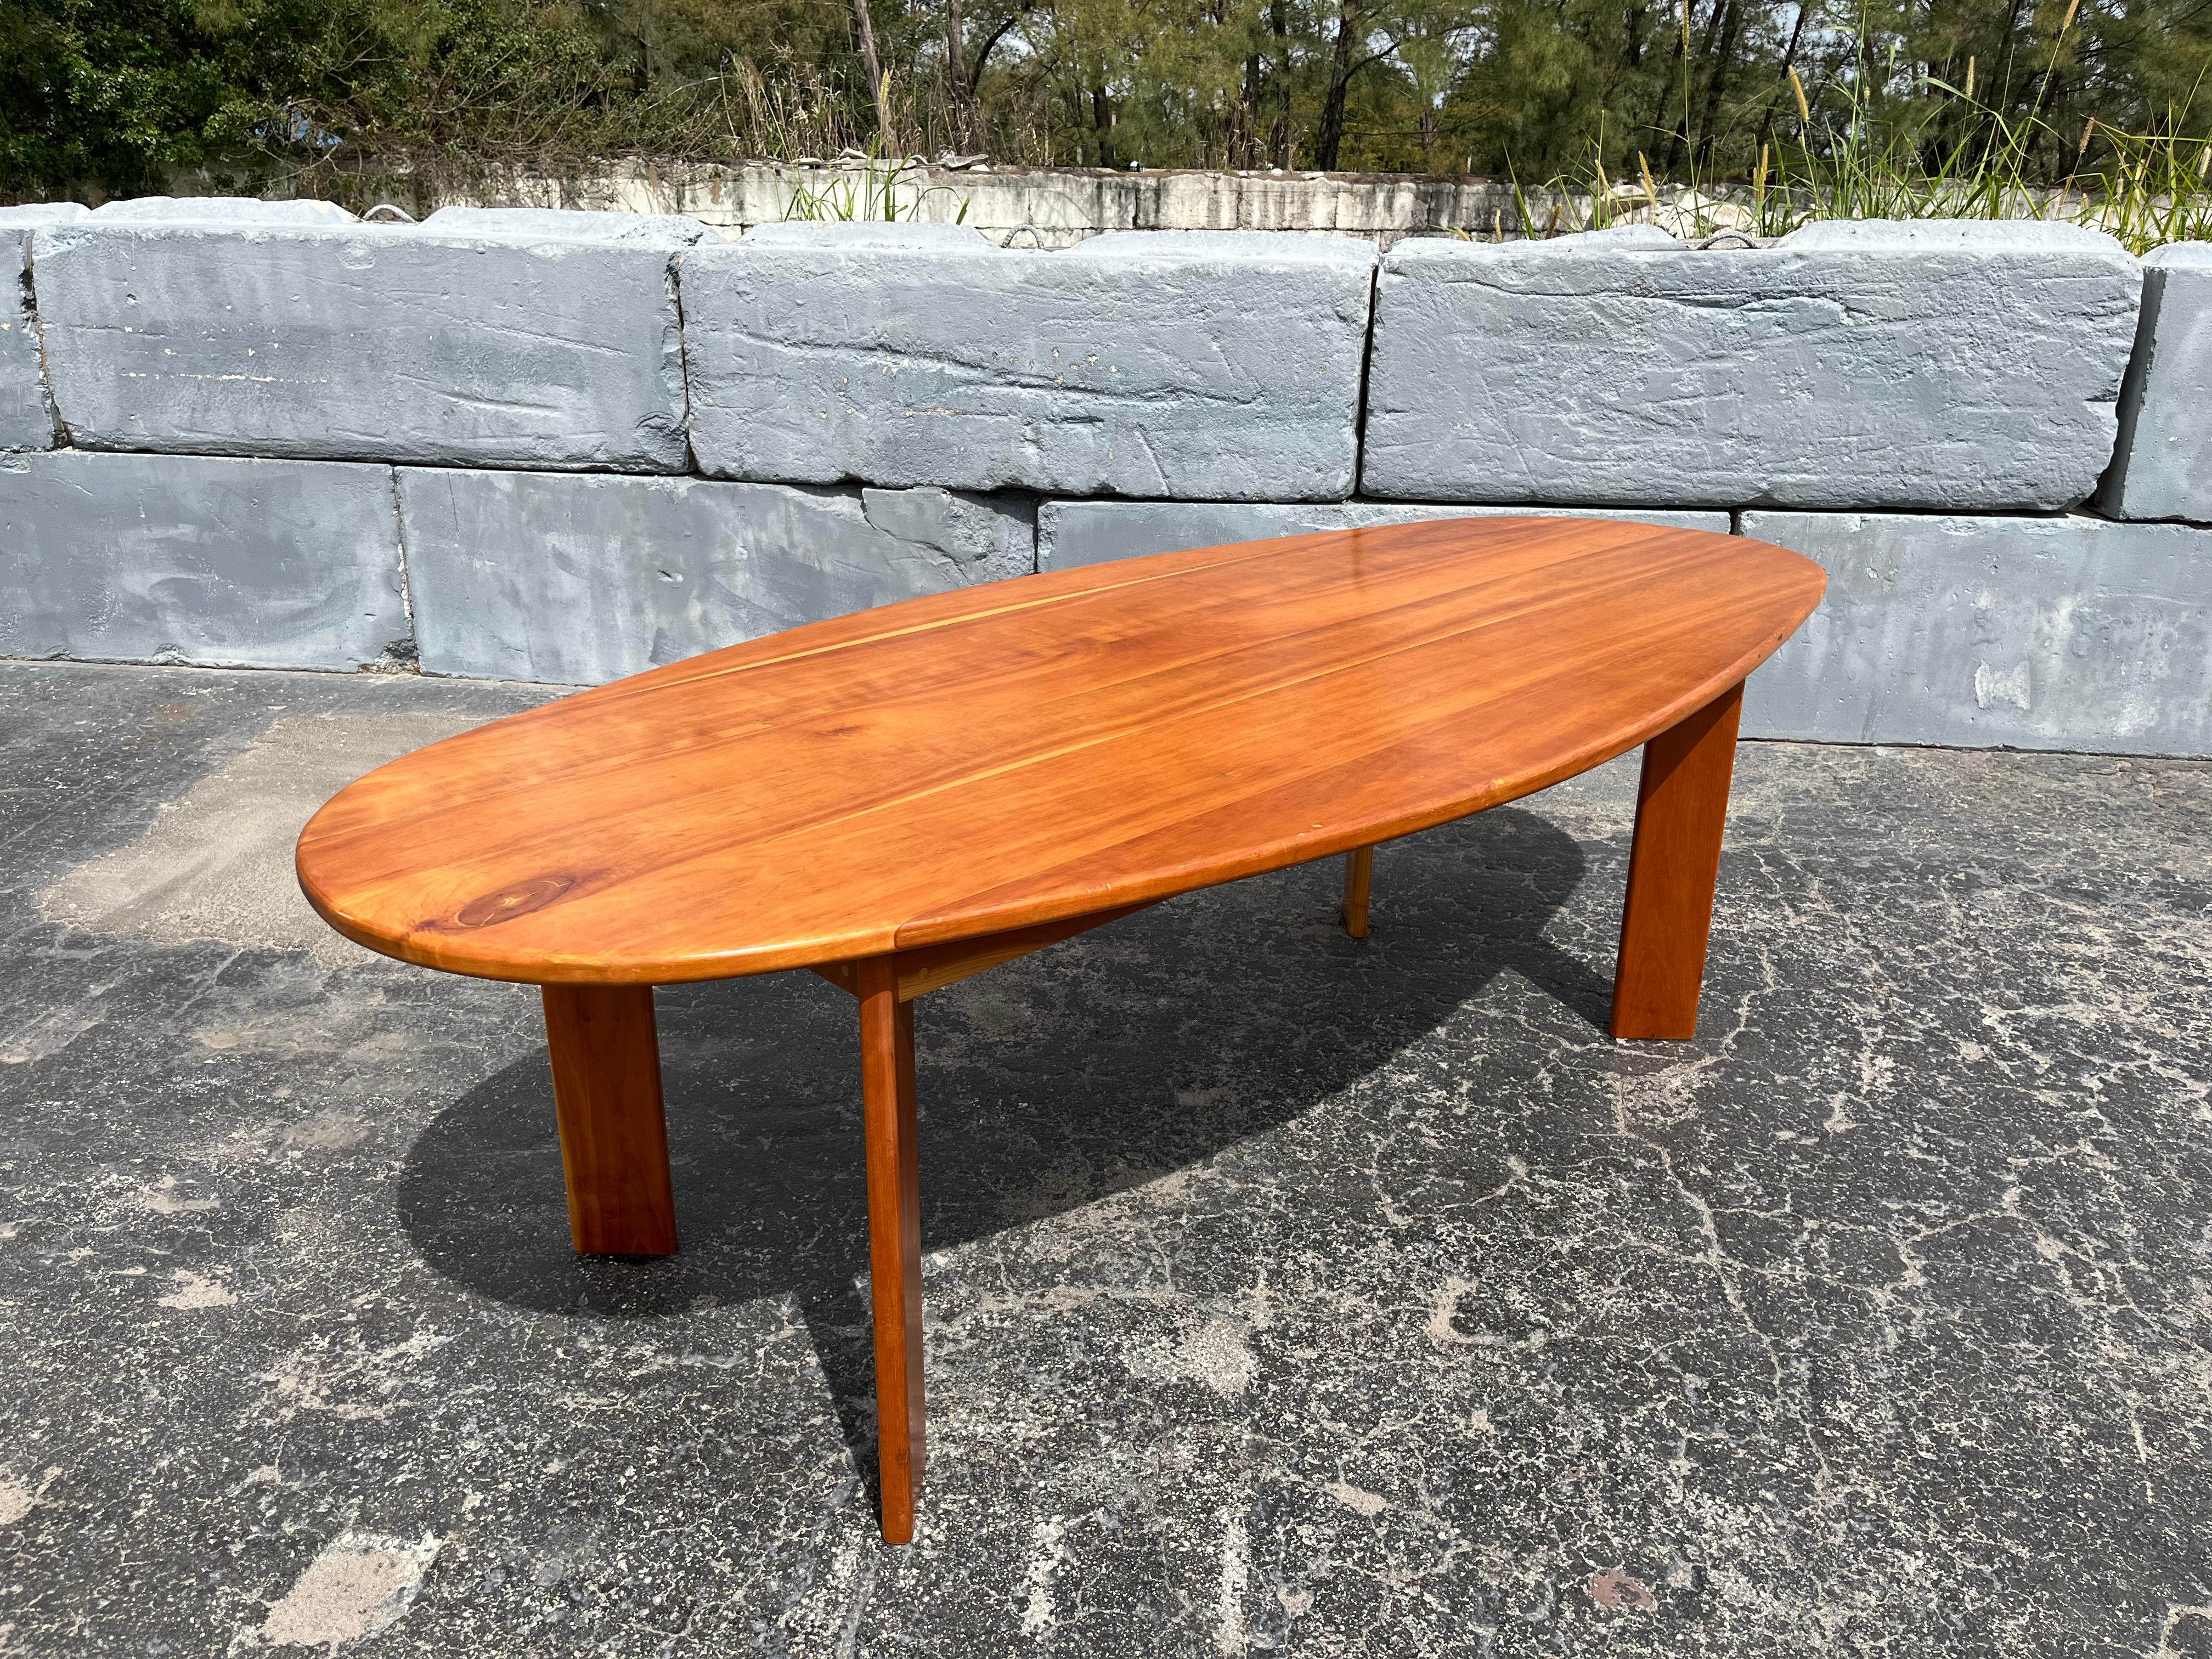 Dining Table or Desk in the Manner of Charlotte Perriand. Table top is 1.38” thick. Ready for a new home. Chairs are not for sale.